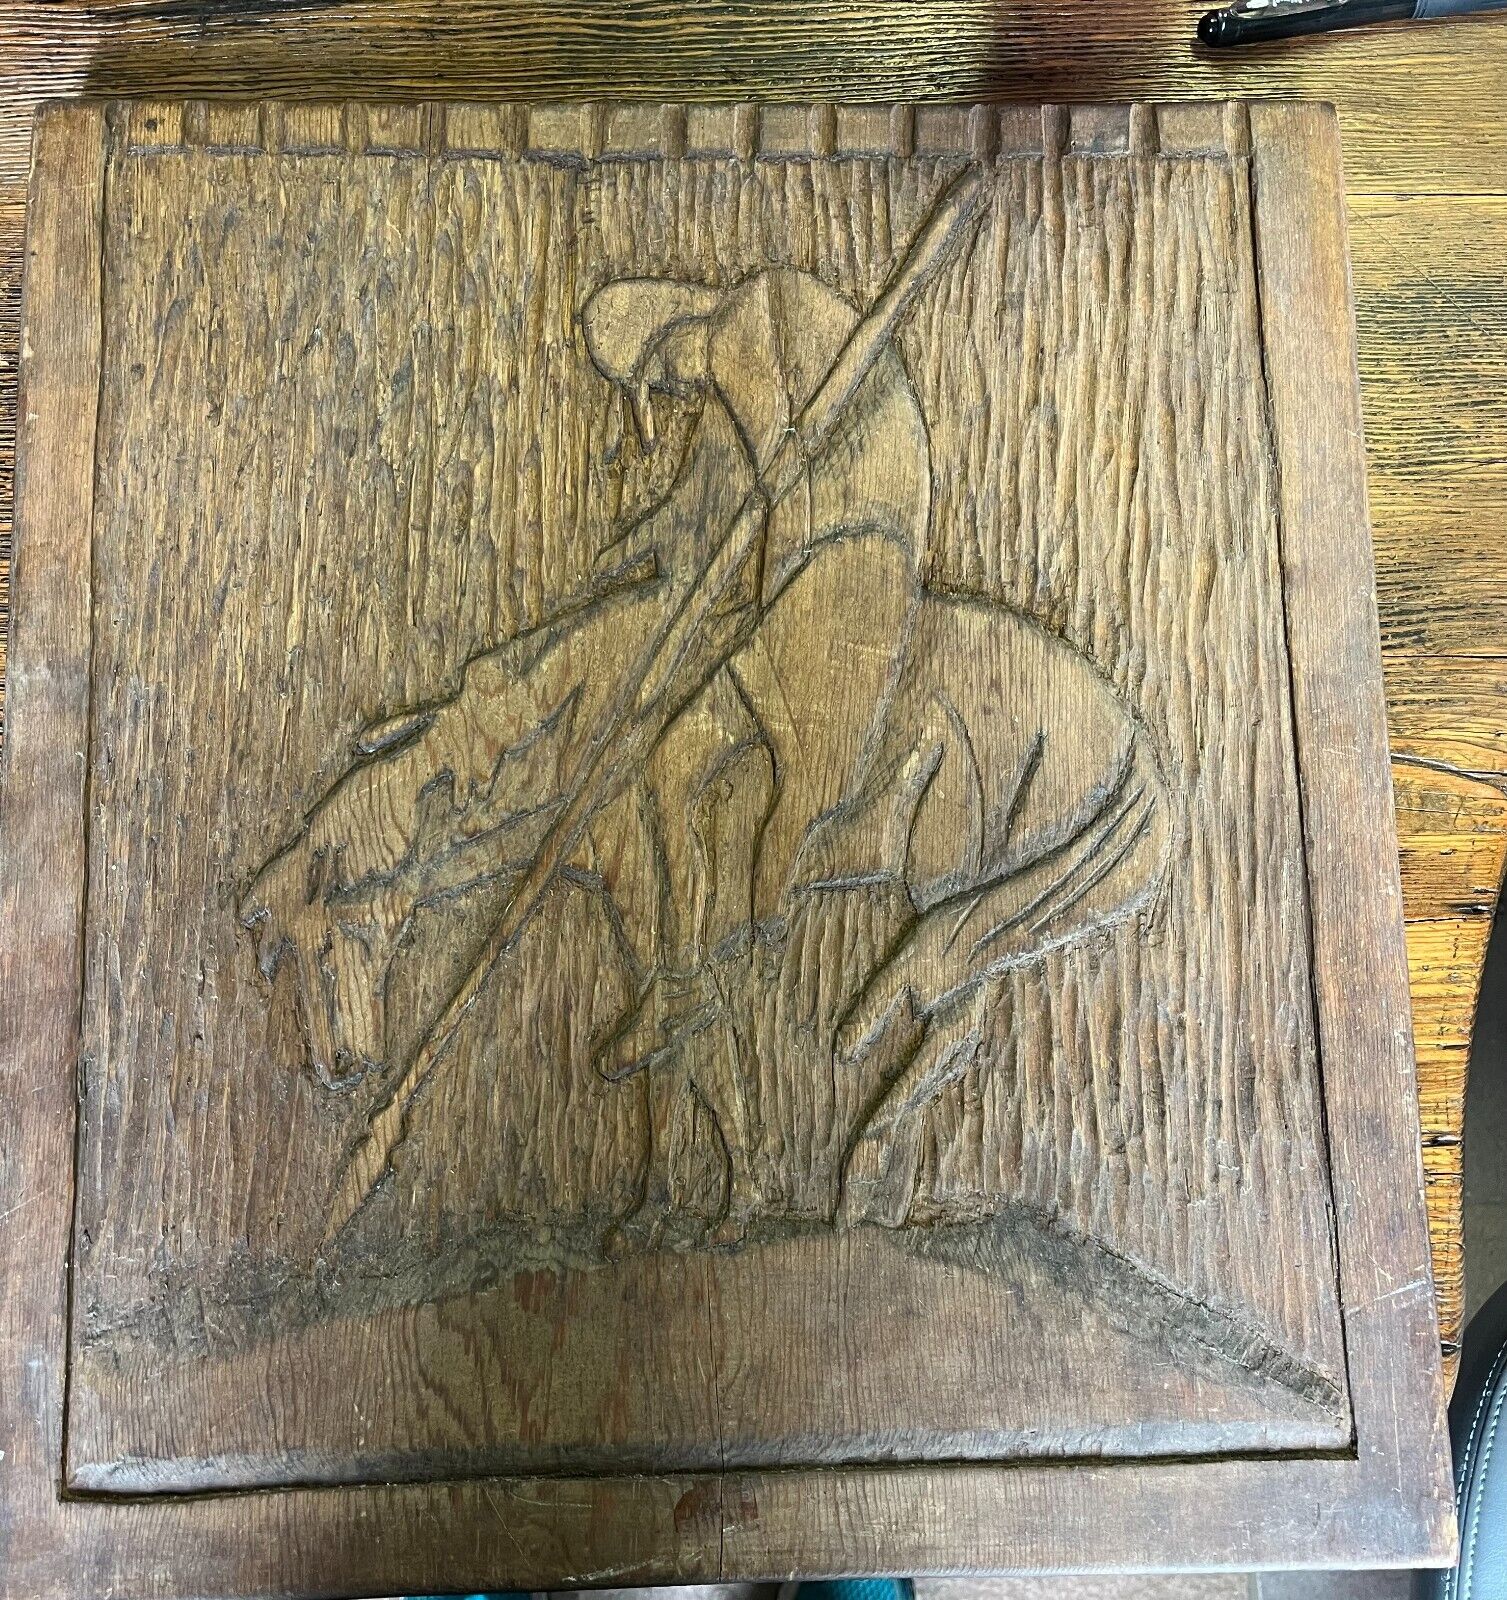 END OF THE TRAIL WOOD PANEL CARVING  WALL HANGING  17